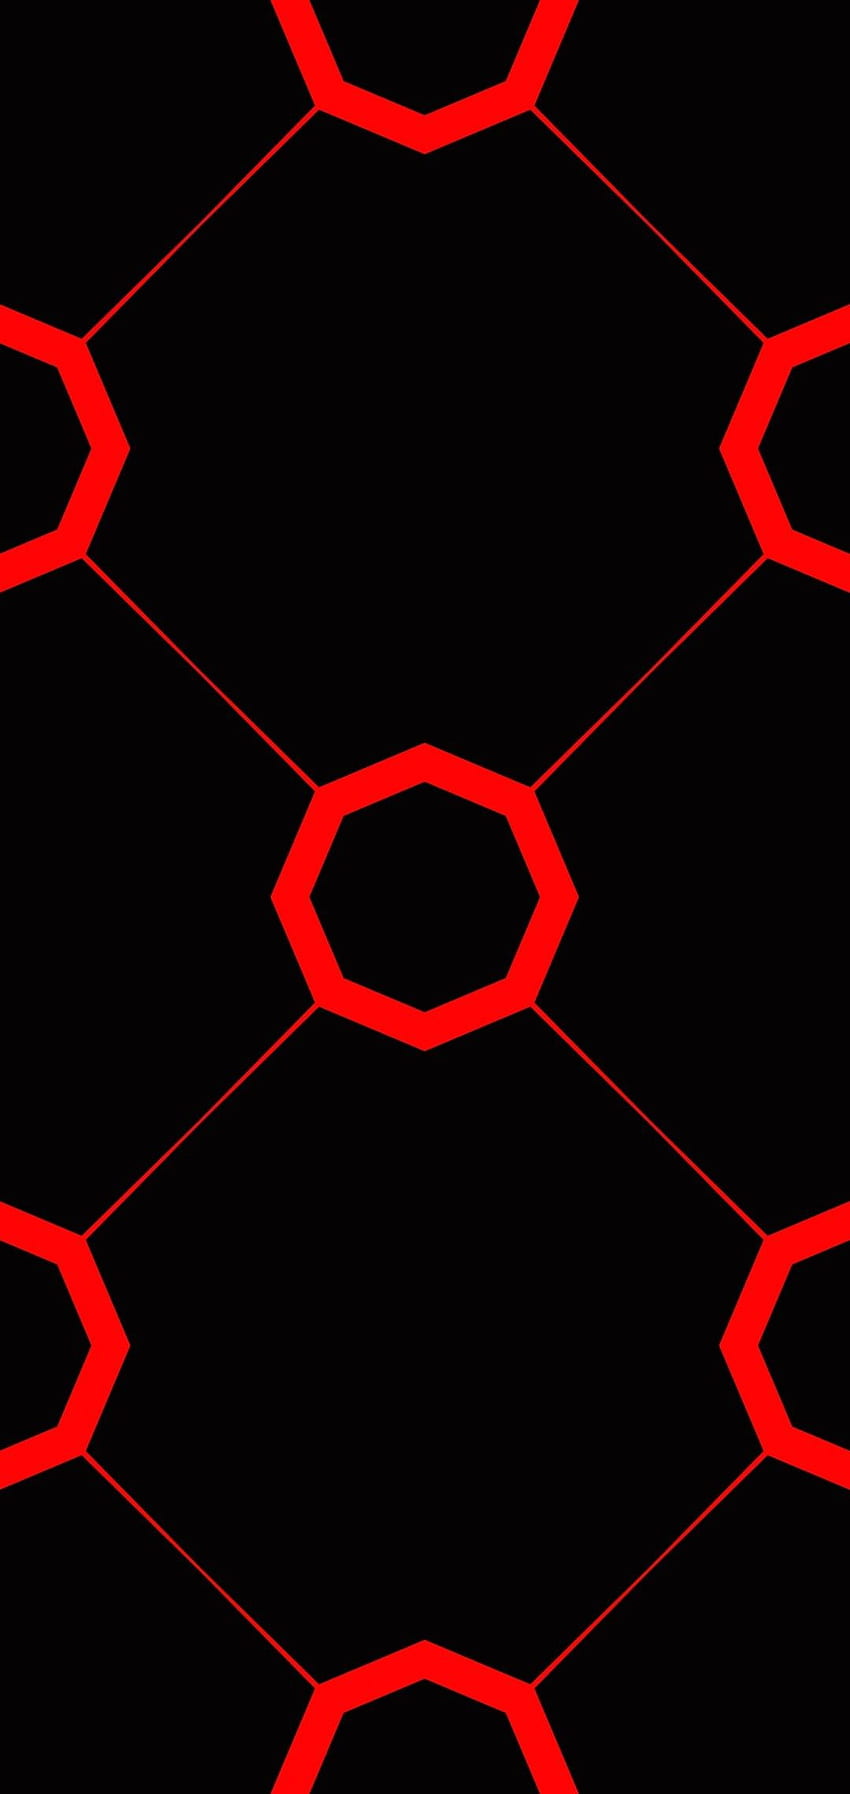 Red Polygons, Pattern, Red Connections for Samsung Galaxy S10e, Xiaomi Mi A2 Lite, OnePlus 6, 1080X2280 Polygon HD phone wallpaper